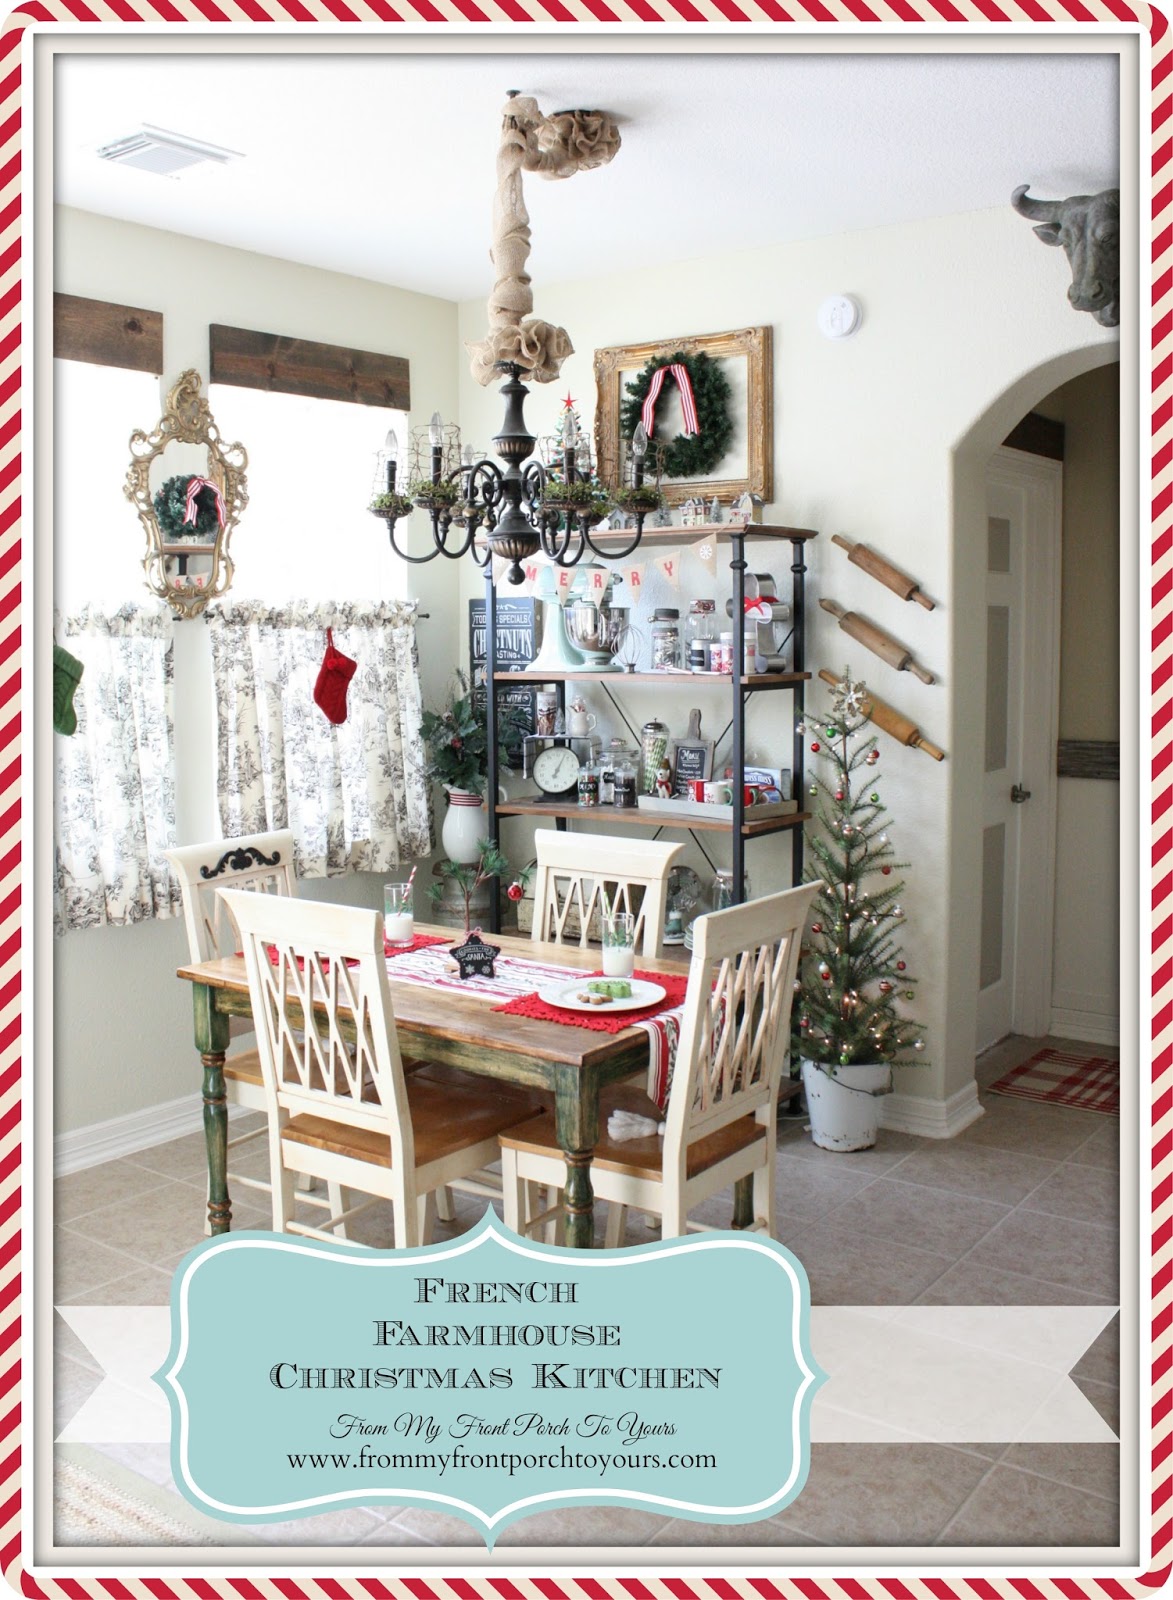 French Farmhouse Christmas Kitchen- From My Front Porch To Yours